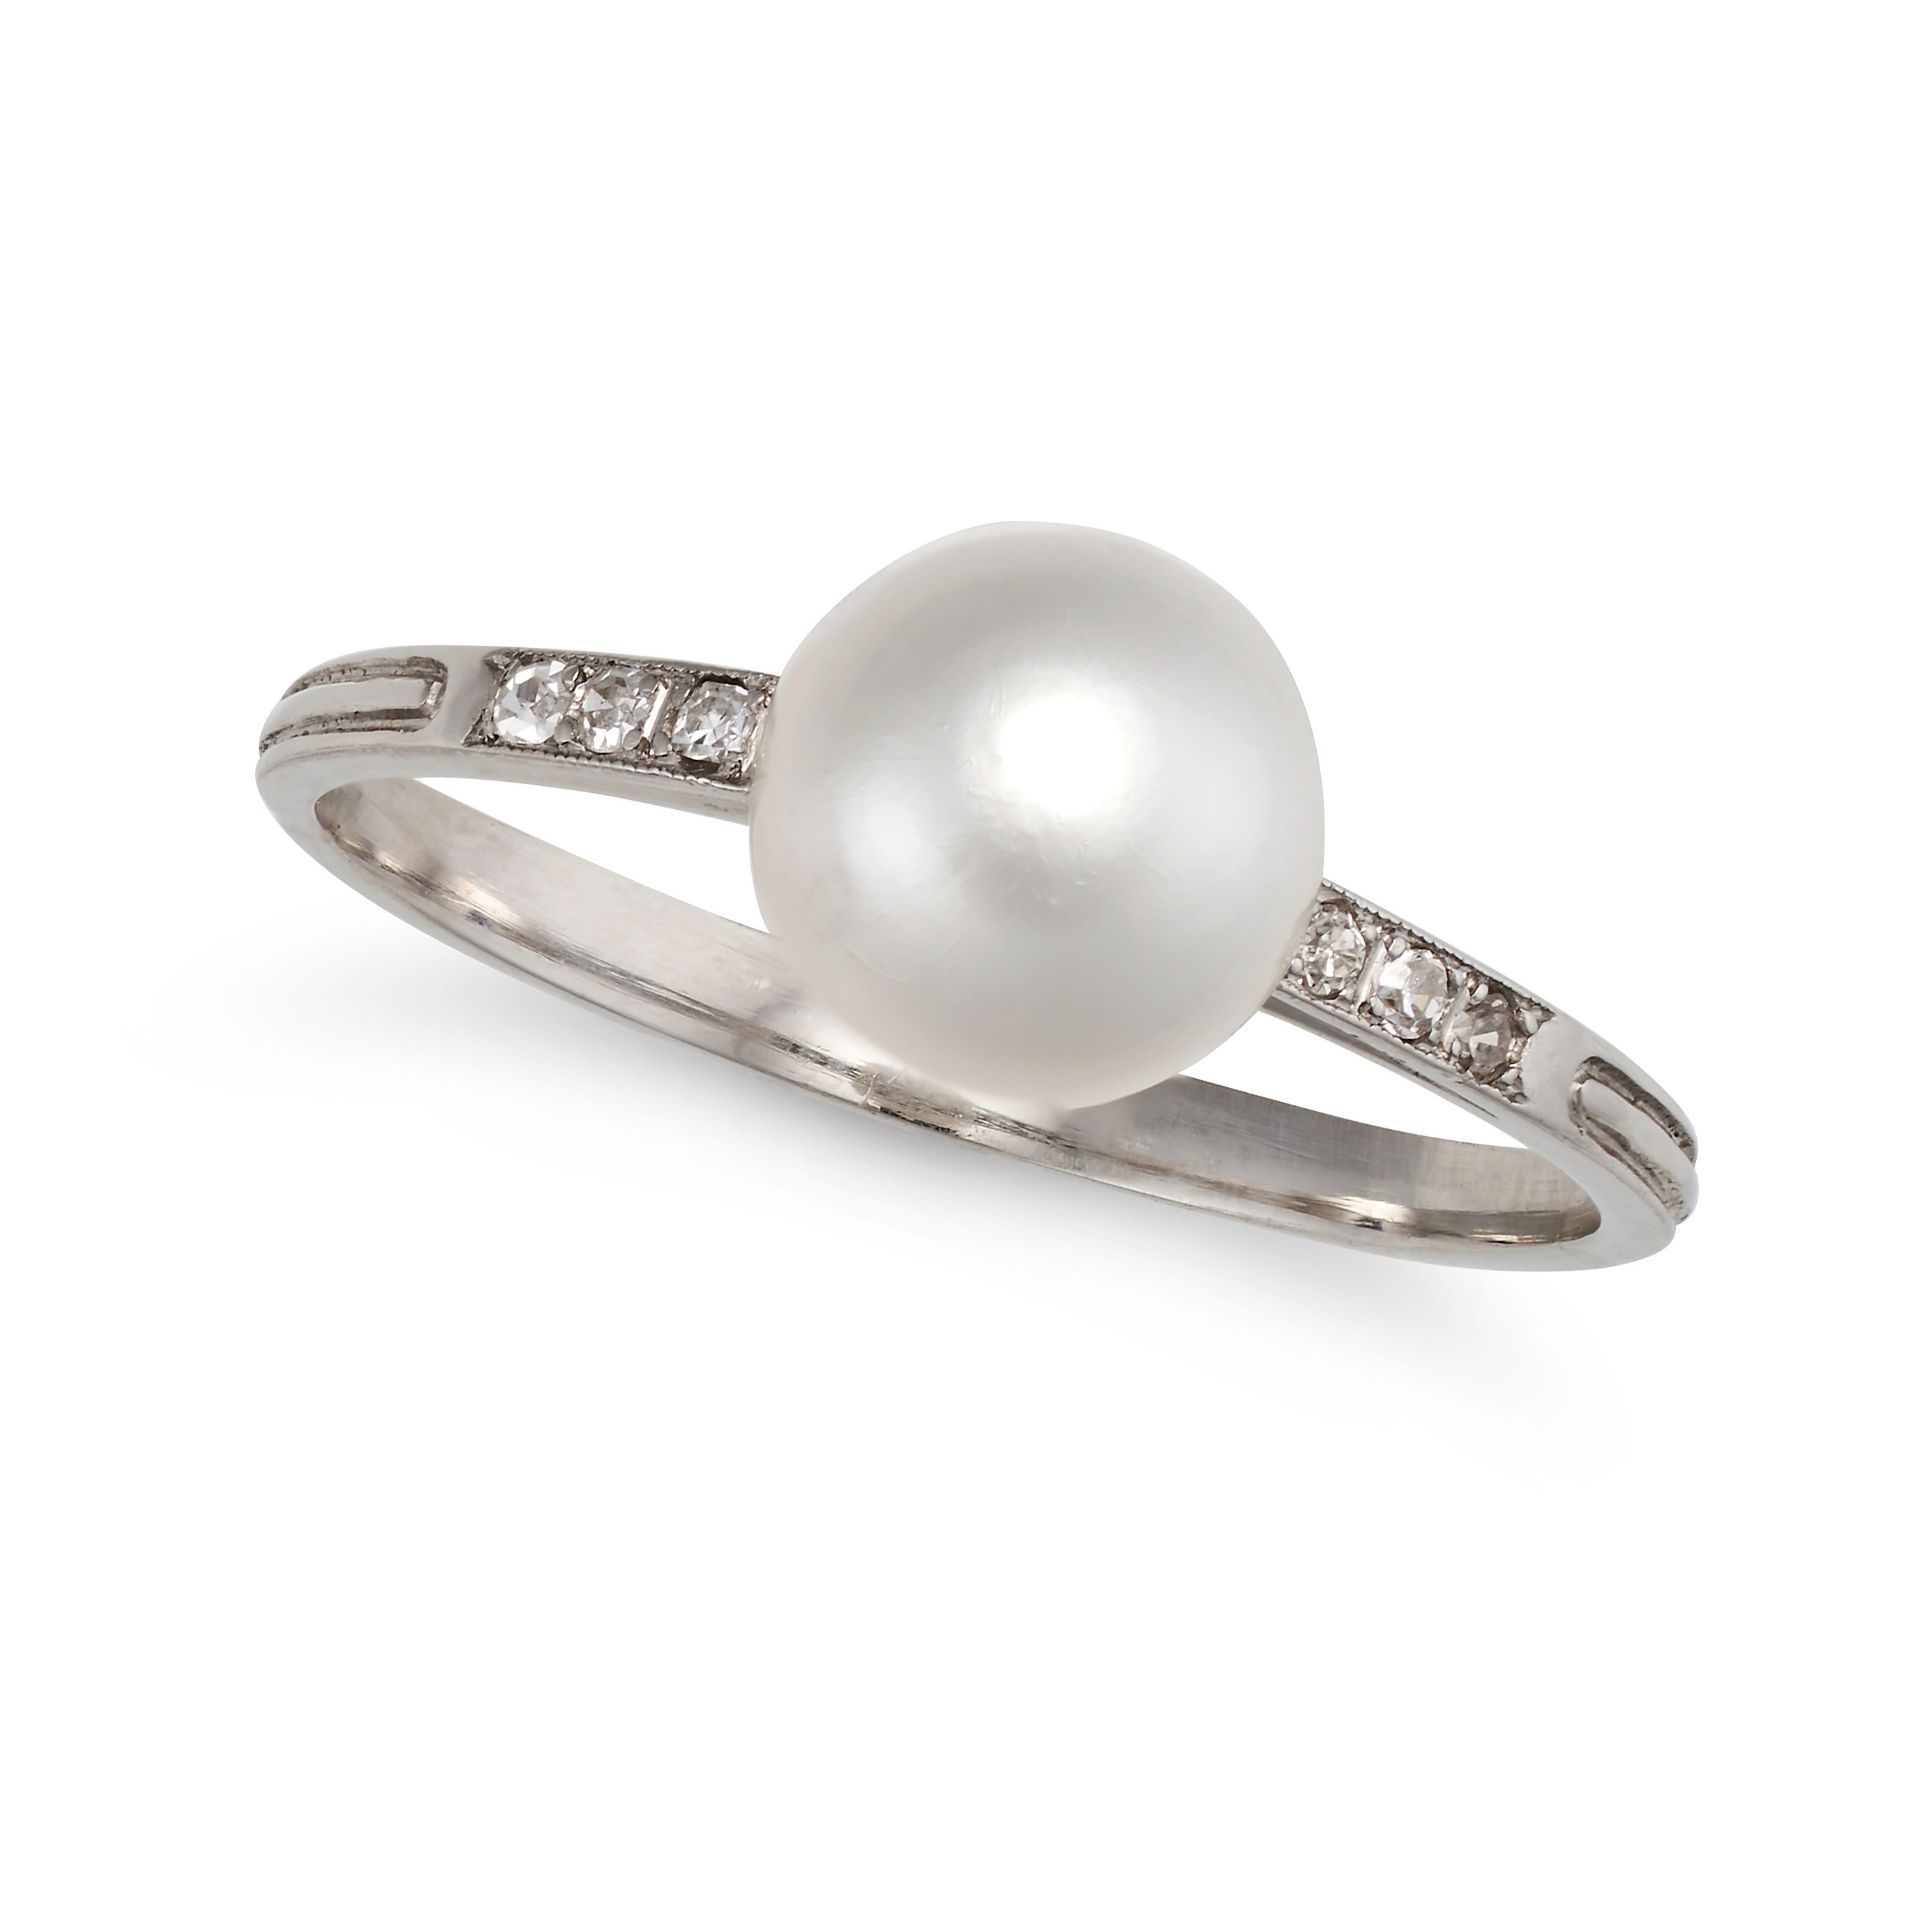 VAN CLEEF & ARPELS, A NATURAL SALTWATER PEARL AND DIAMOND RING in platinum, set with a pearl of 8...